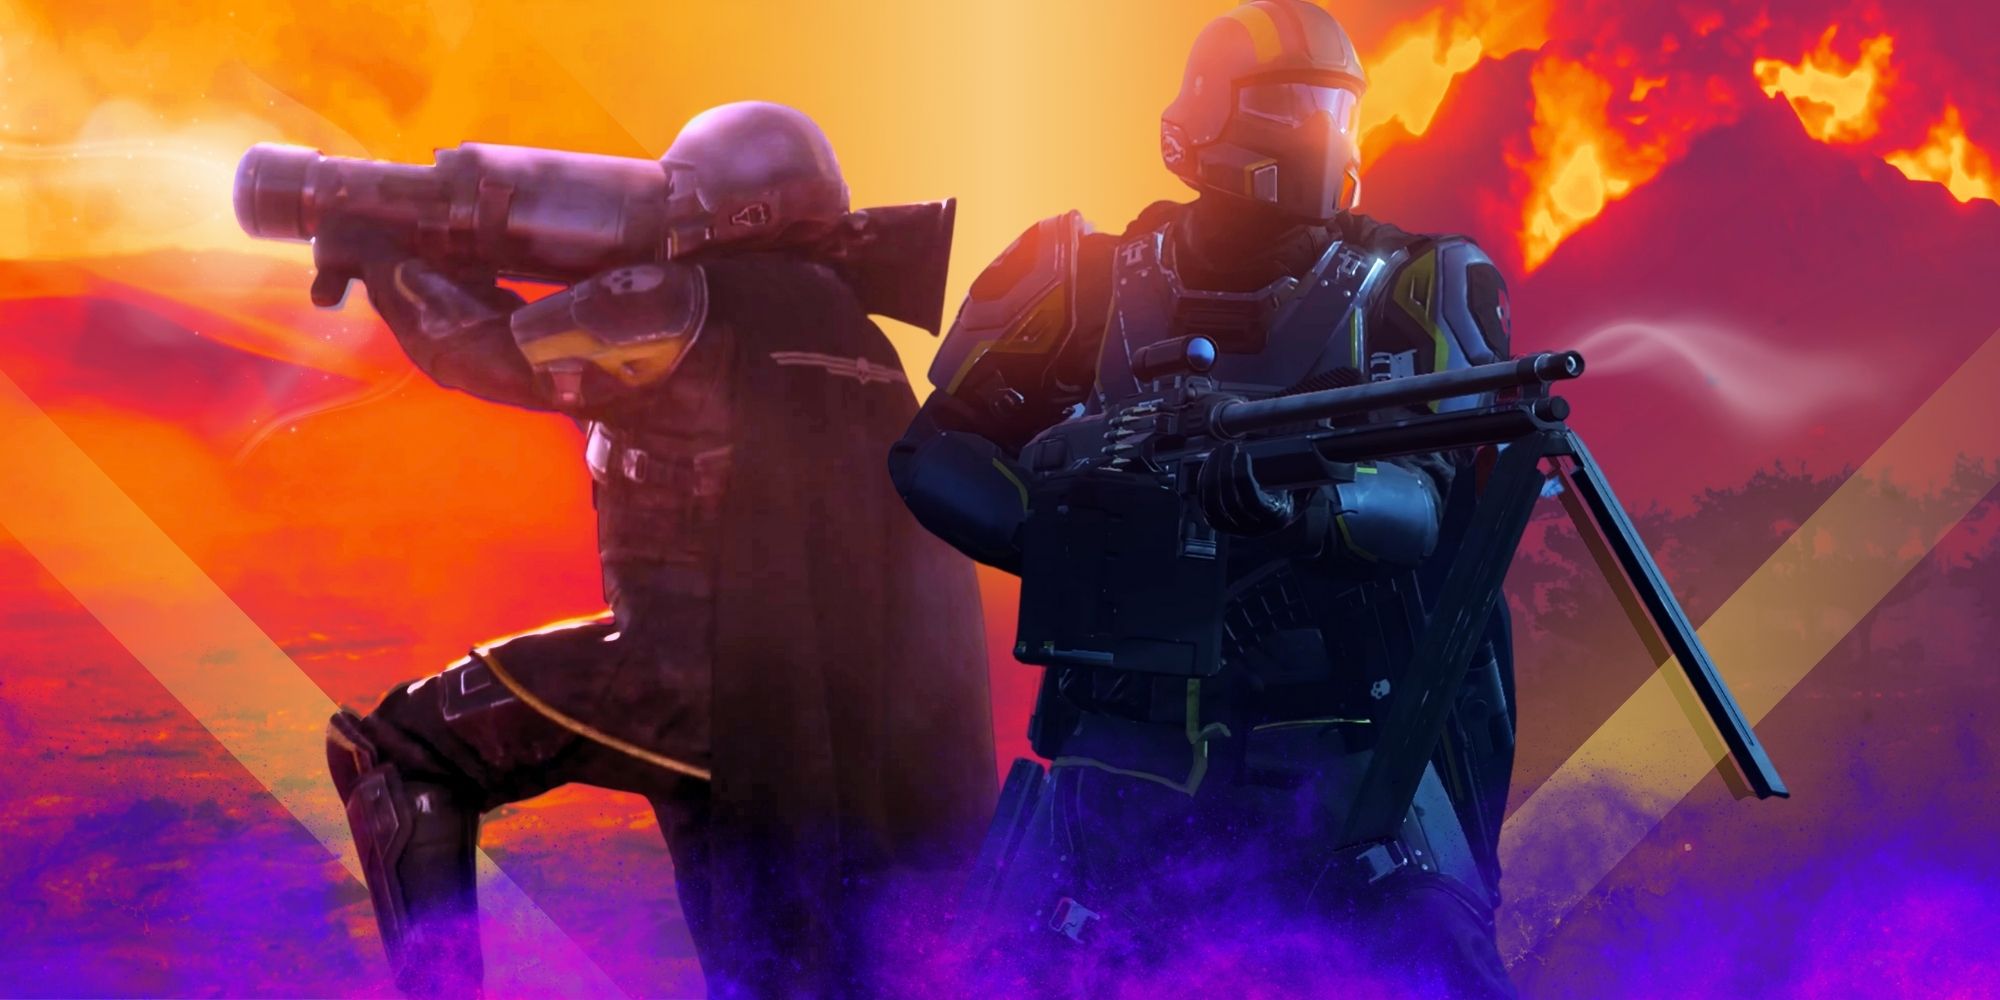 Helldivers 2 characters holding a sniper rifle and rocket launcher in front of a flaming background.